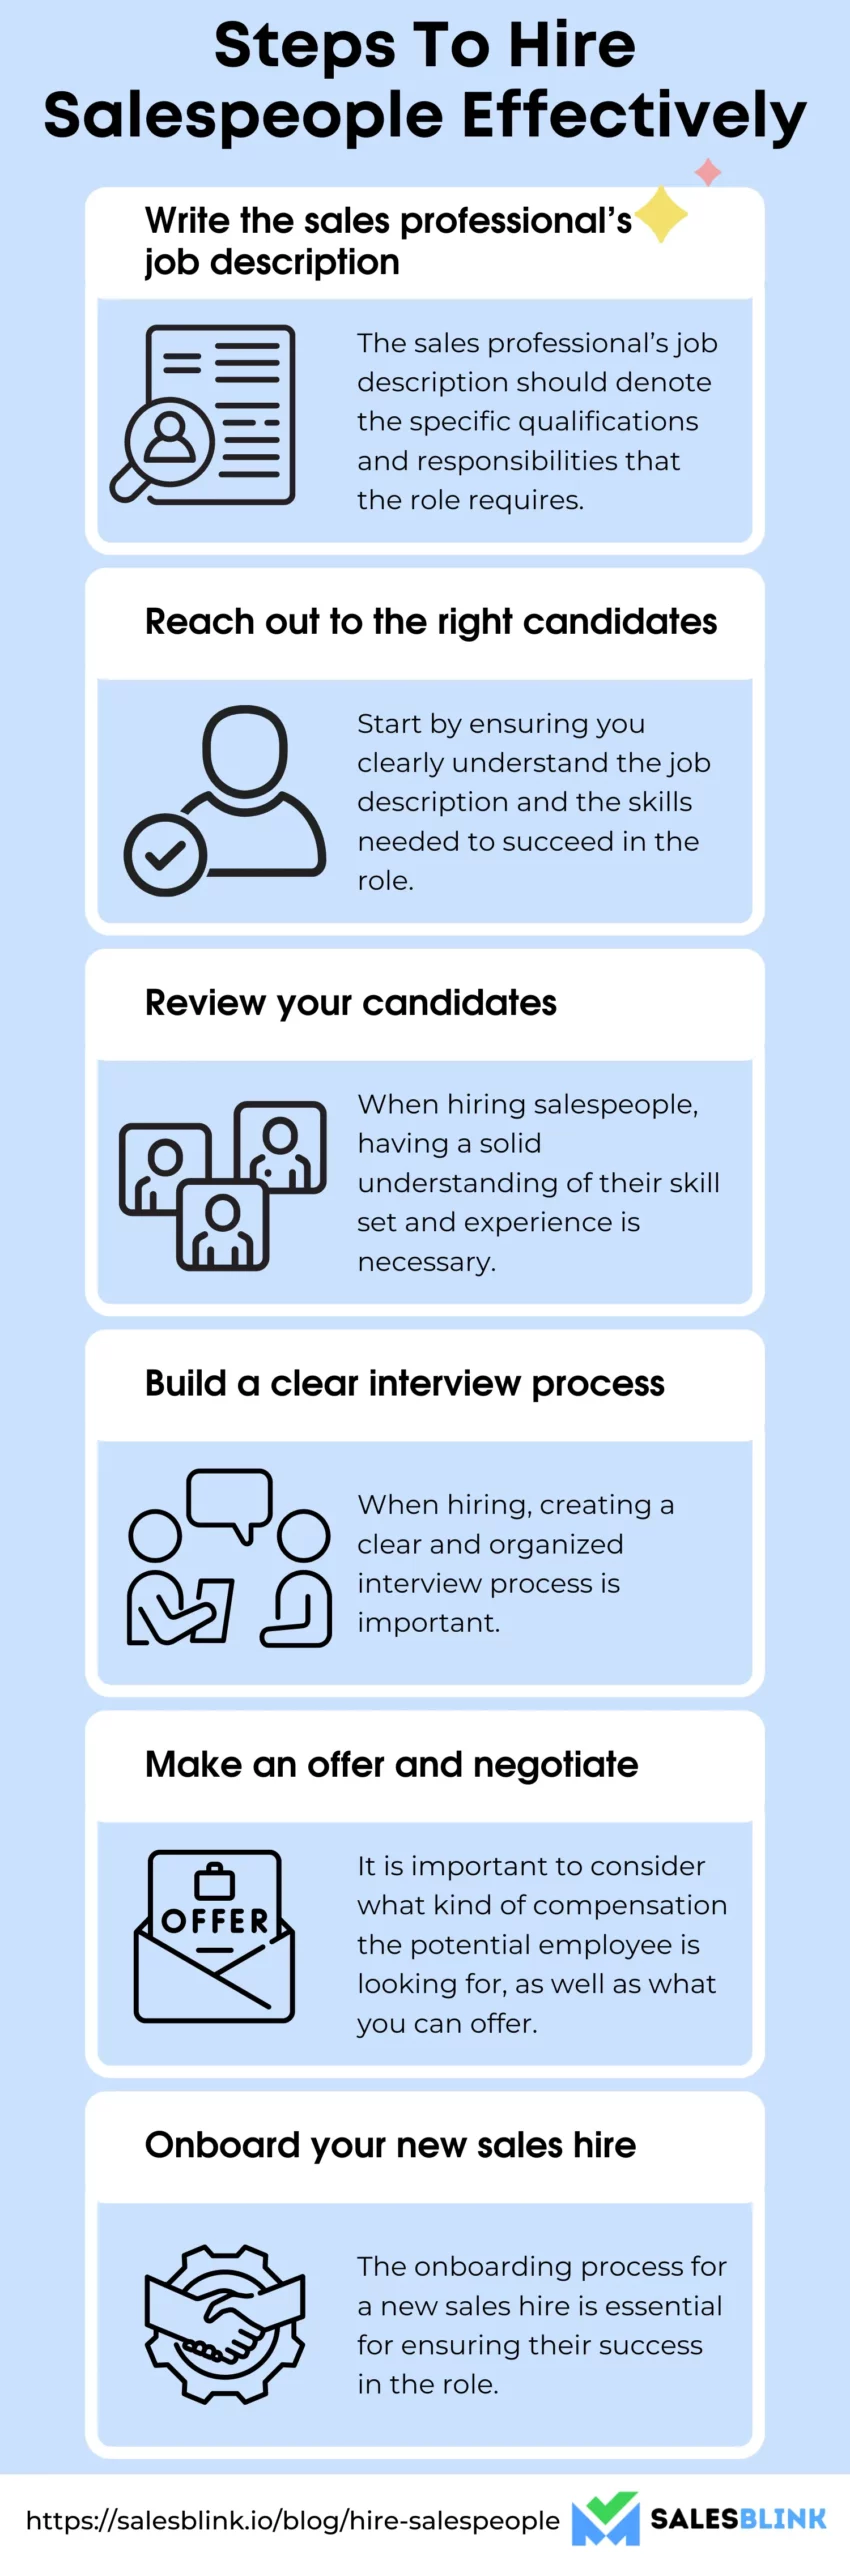 Steps To Hire Salespeople 